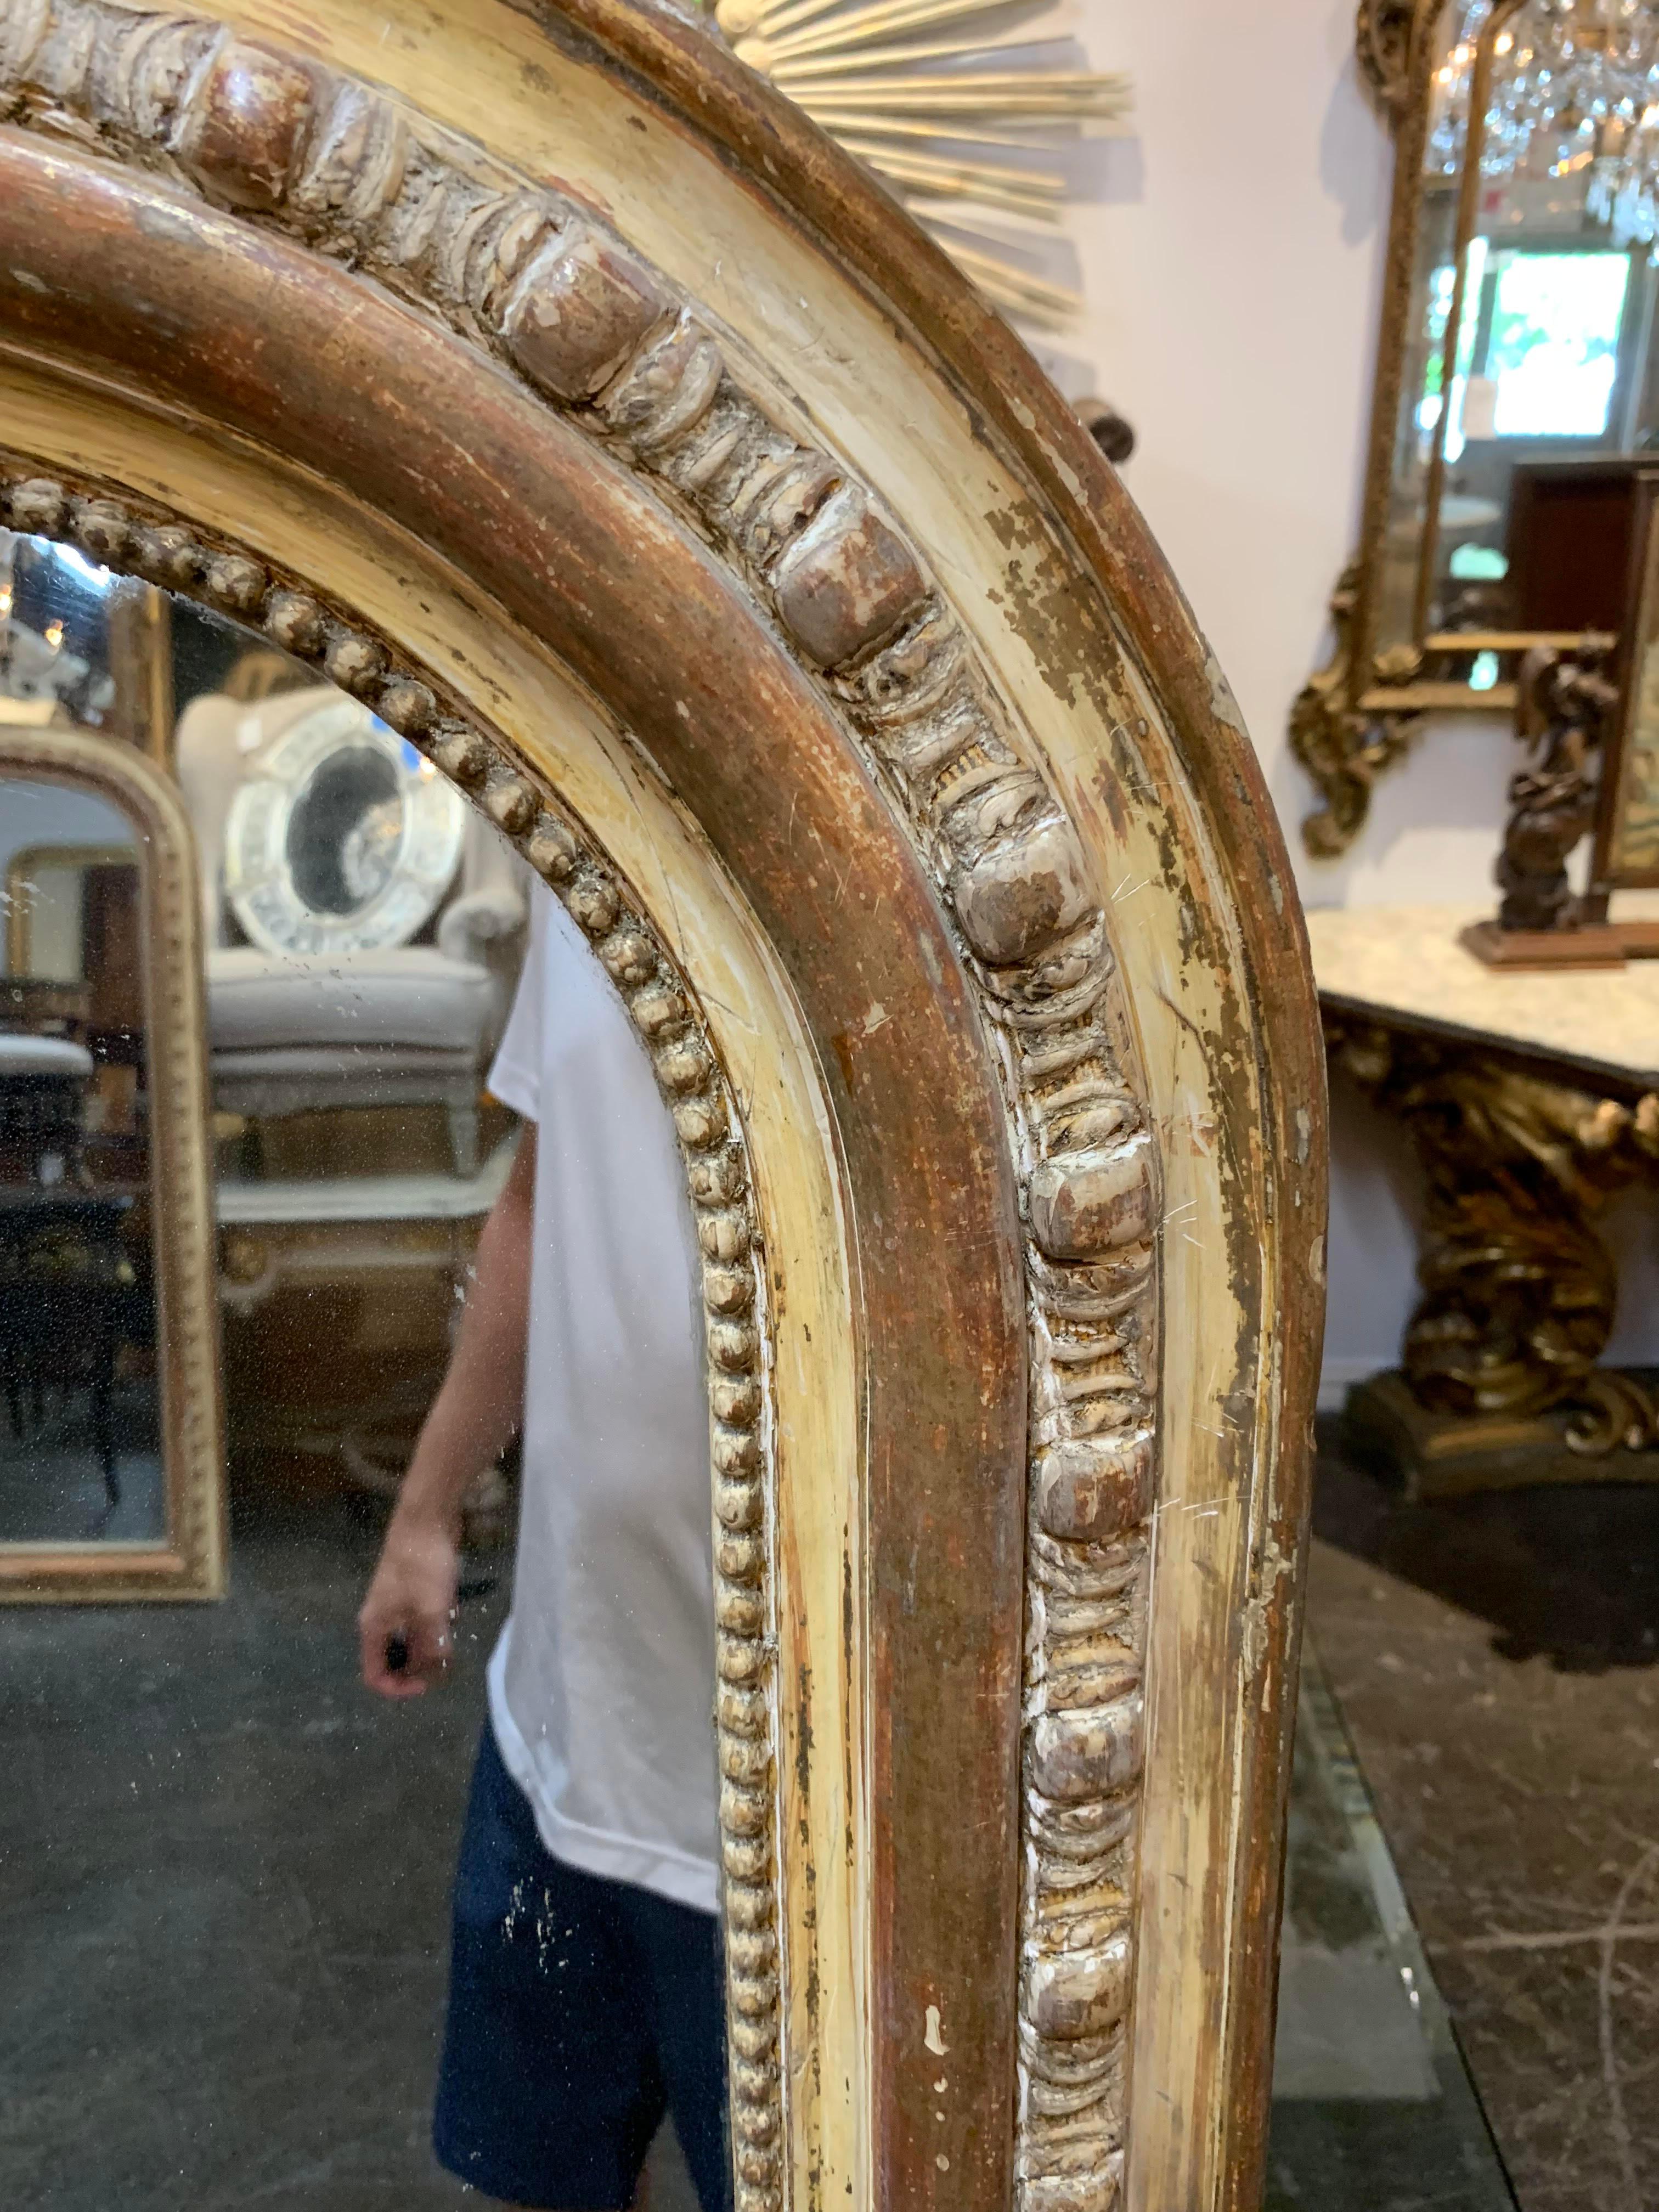 Gorgeous pair of 19th century Louis Phillipe mirrors with original mercury glass.
A very nice set for a lovely home. Note: Price is per item. We will split the pair.